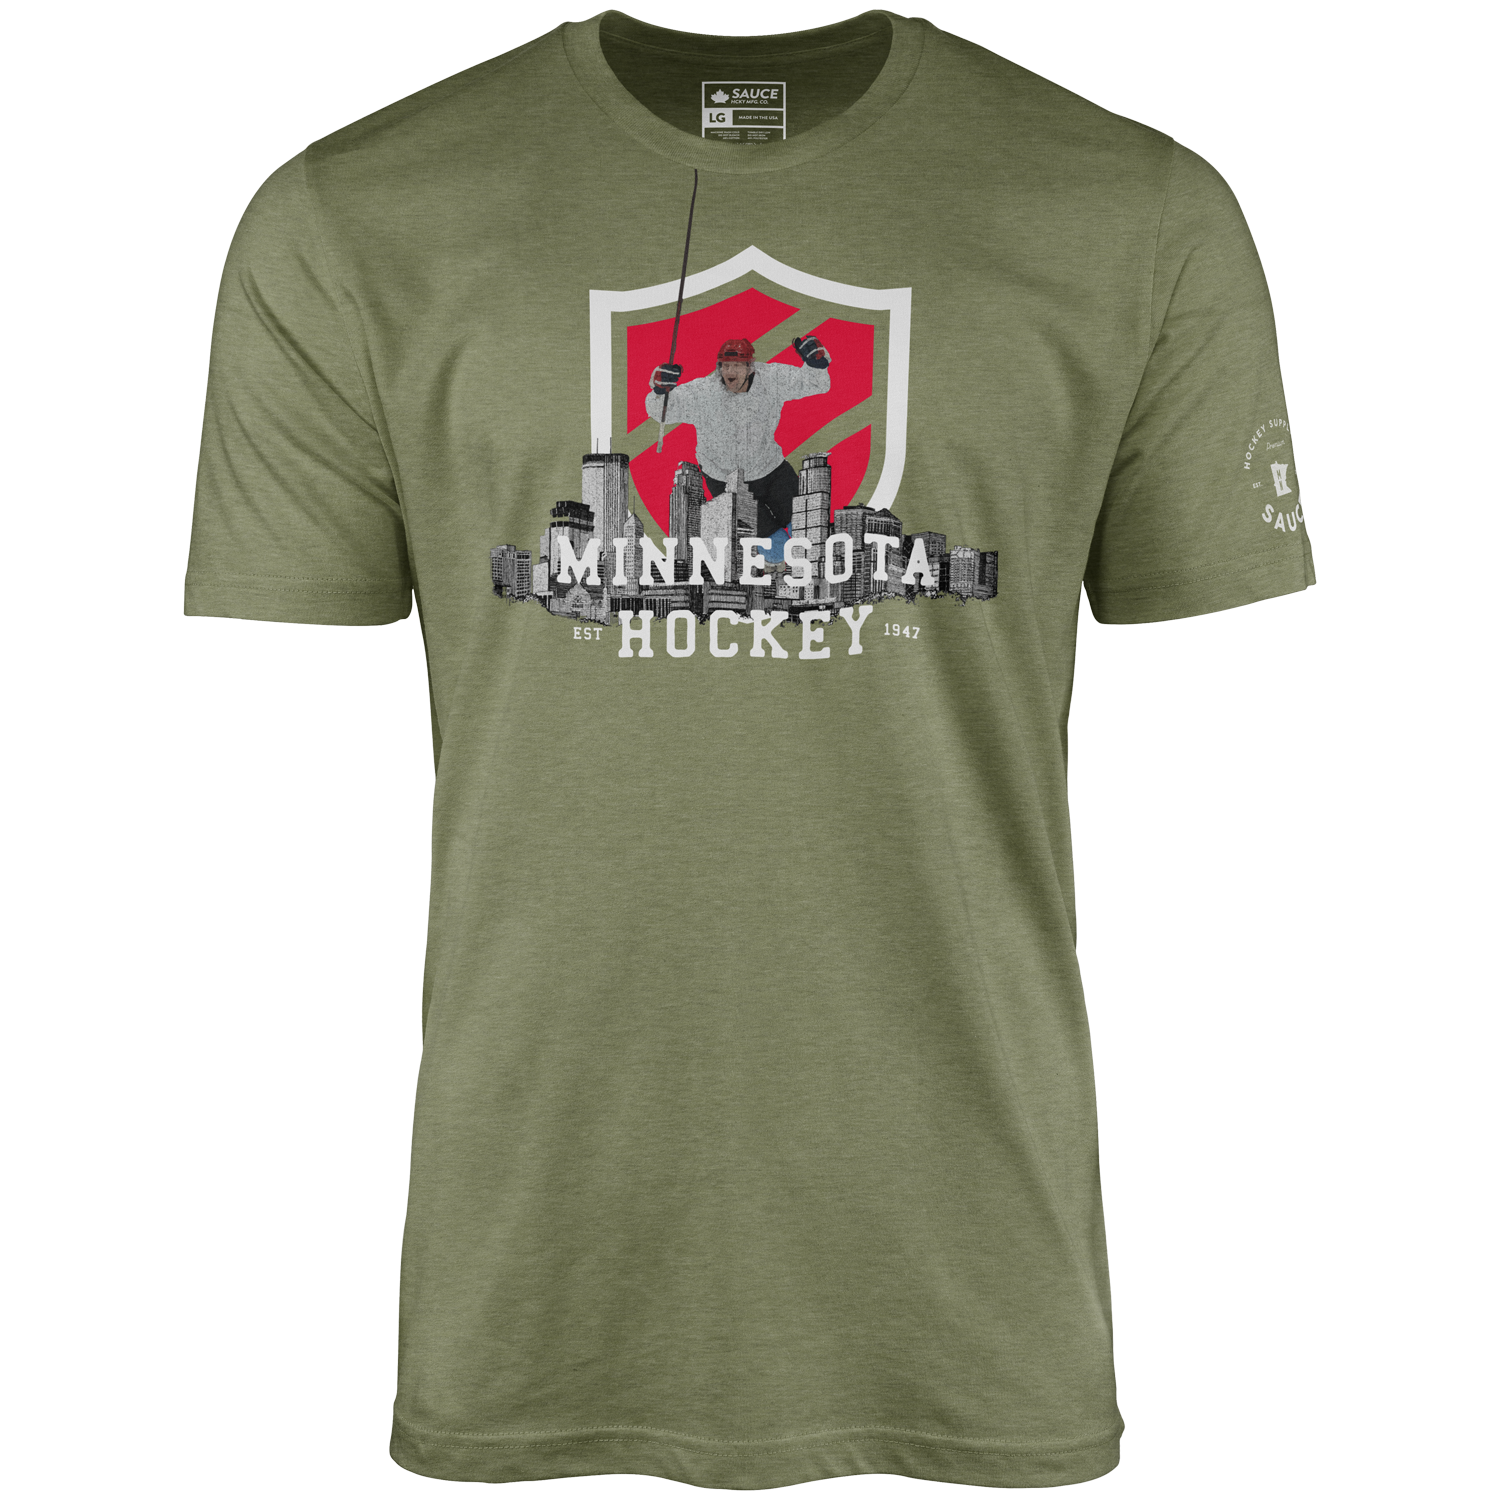 DAIRY QUEEN (MILITARY GREEN)